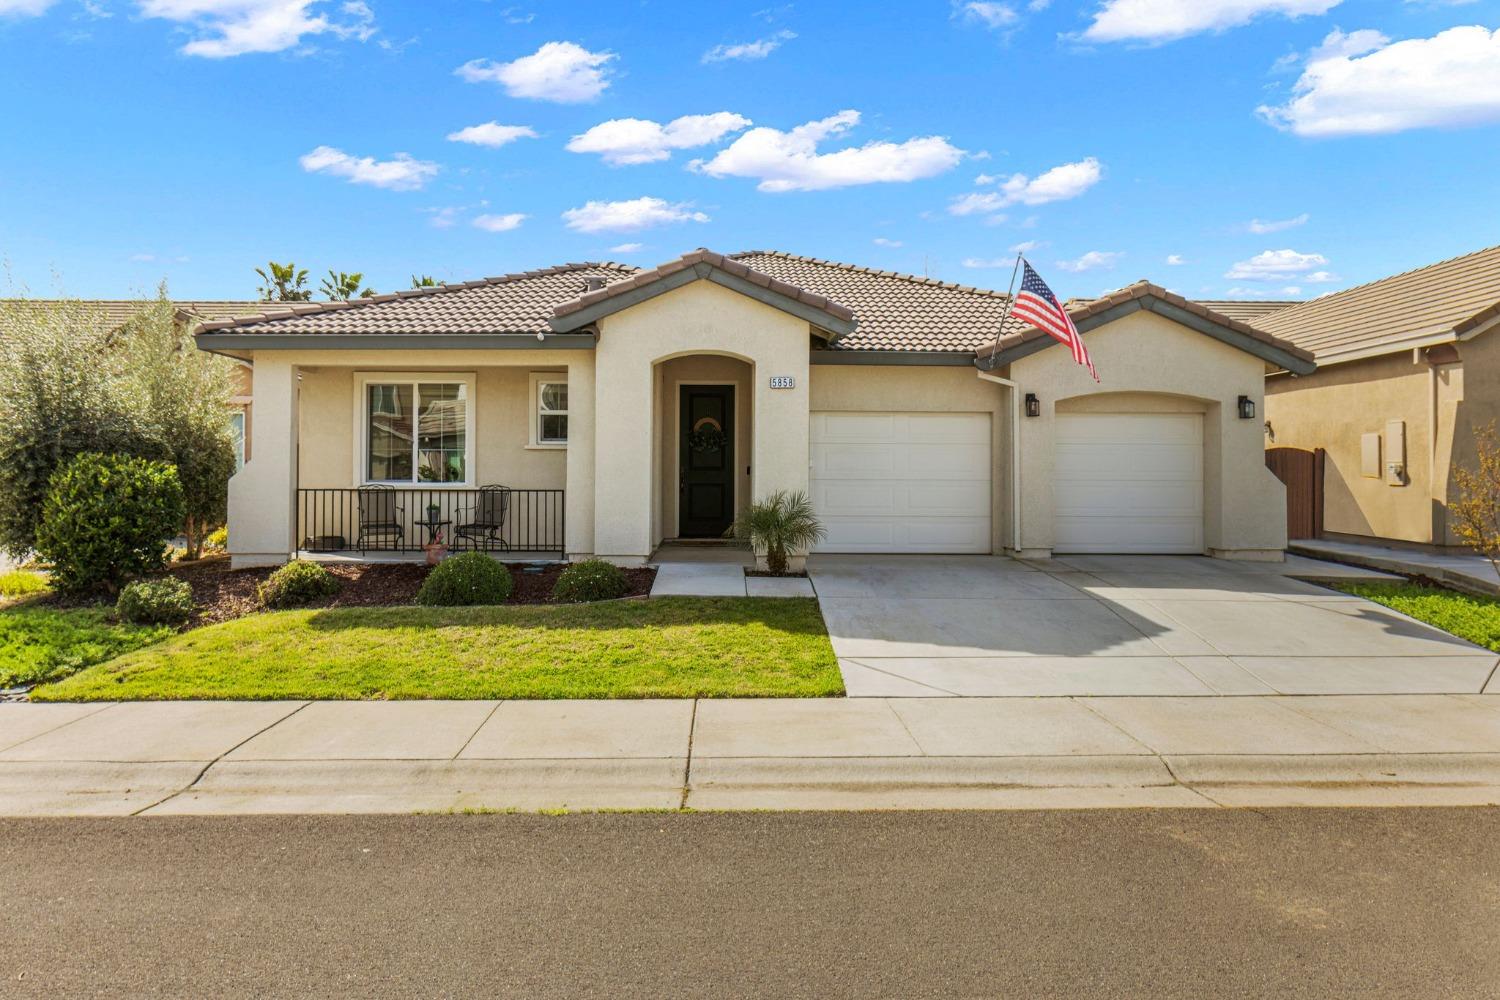 Looking for luxury in a single level home? Look no further than this Natomas beauty! Tastefully desi